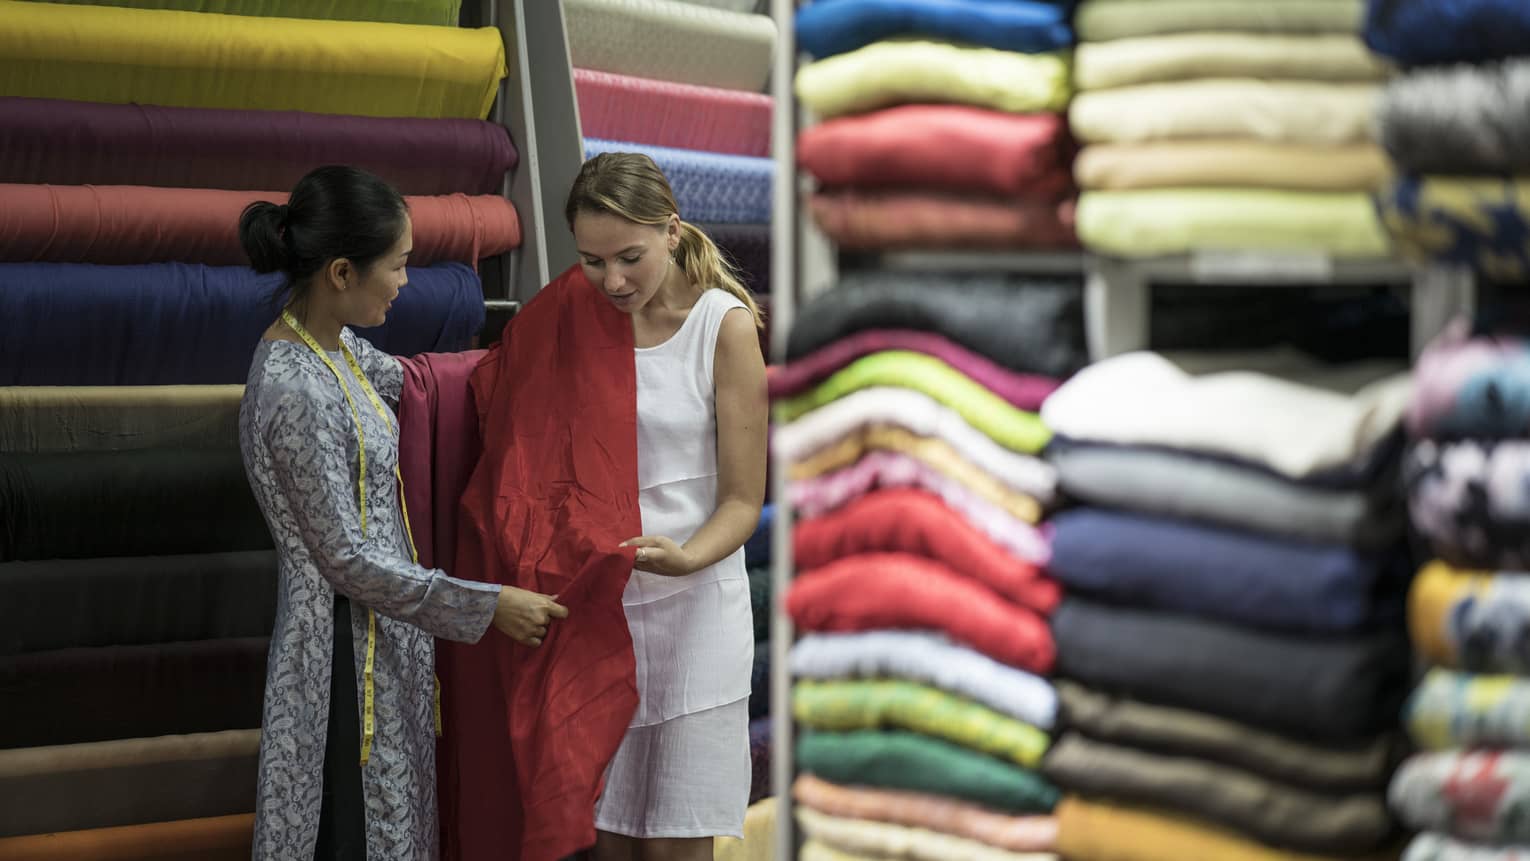 Two women standing in a room of fabric.